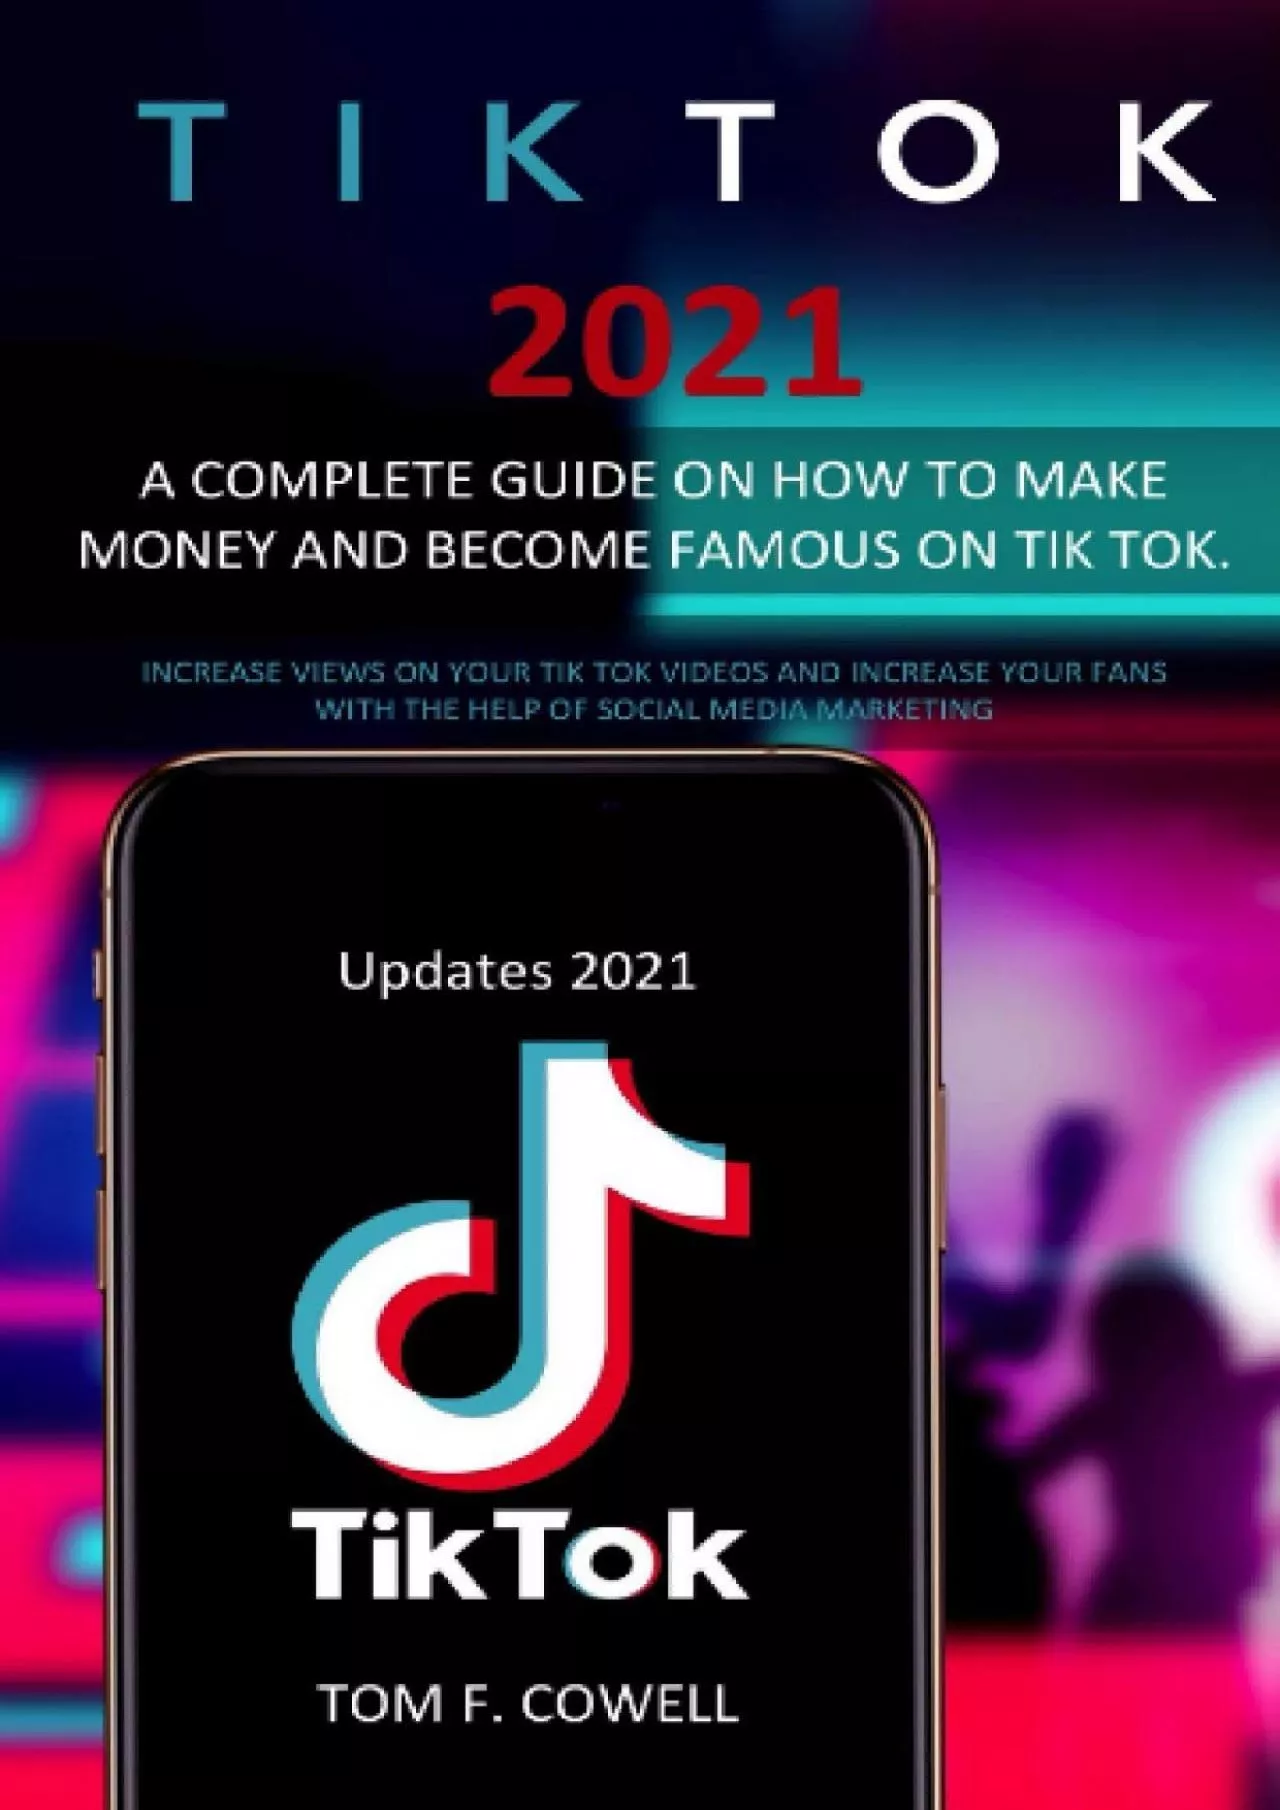 Tik Tok 2021: A Complete Guide on How to Make Money and Become Famous on Tik Tok. Increase